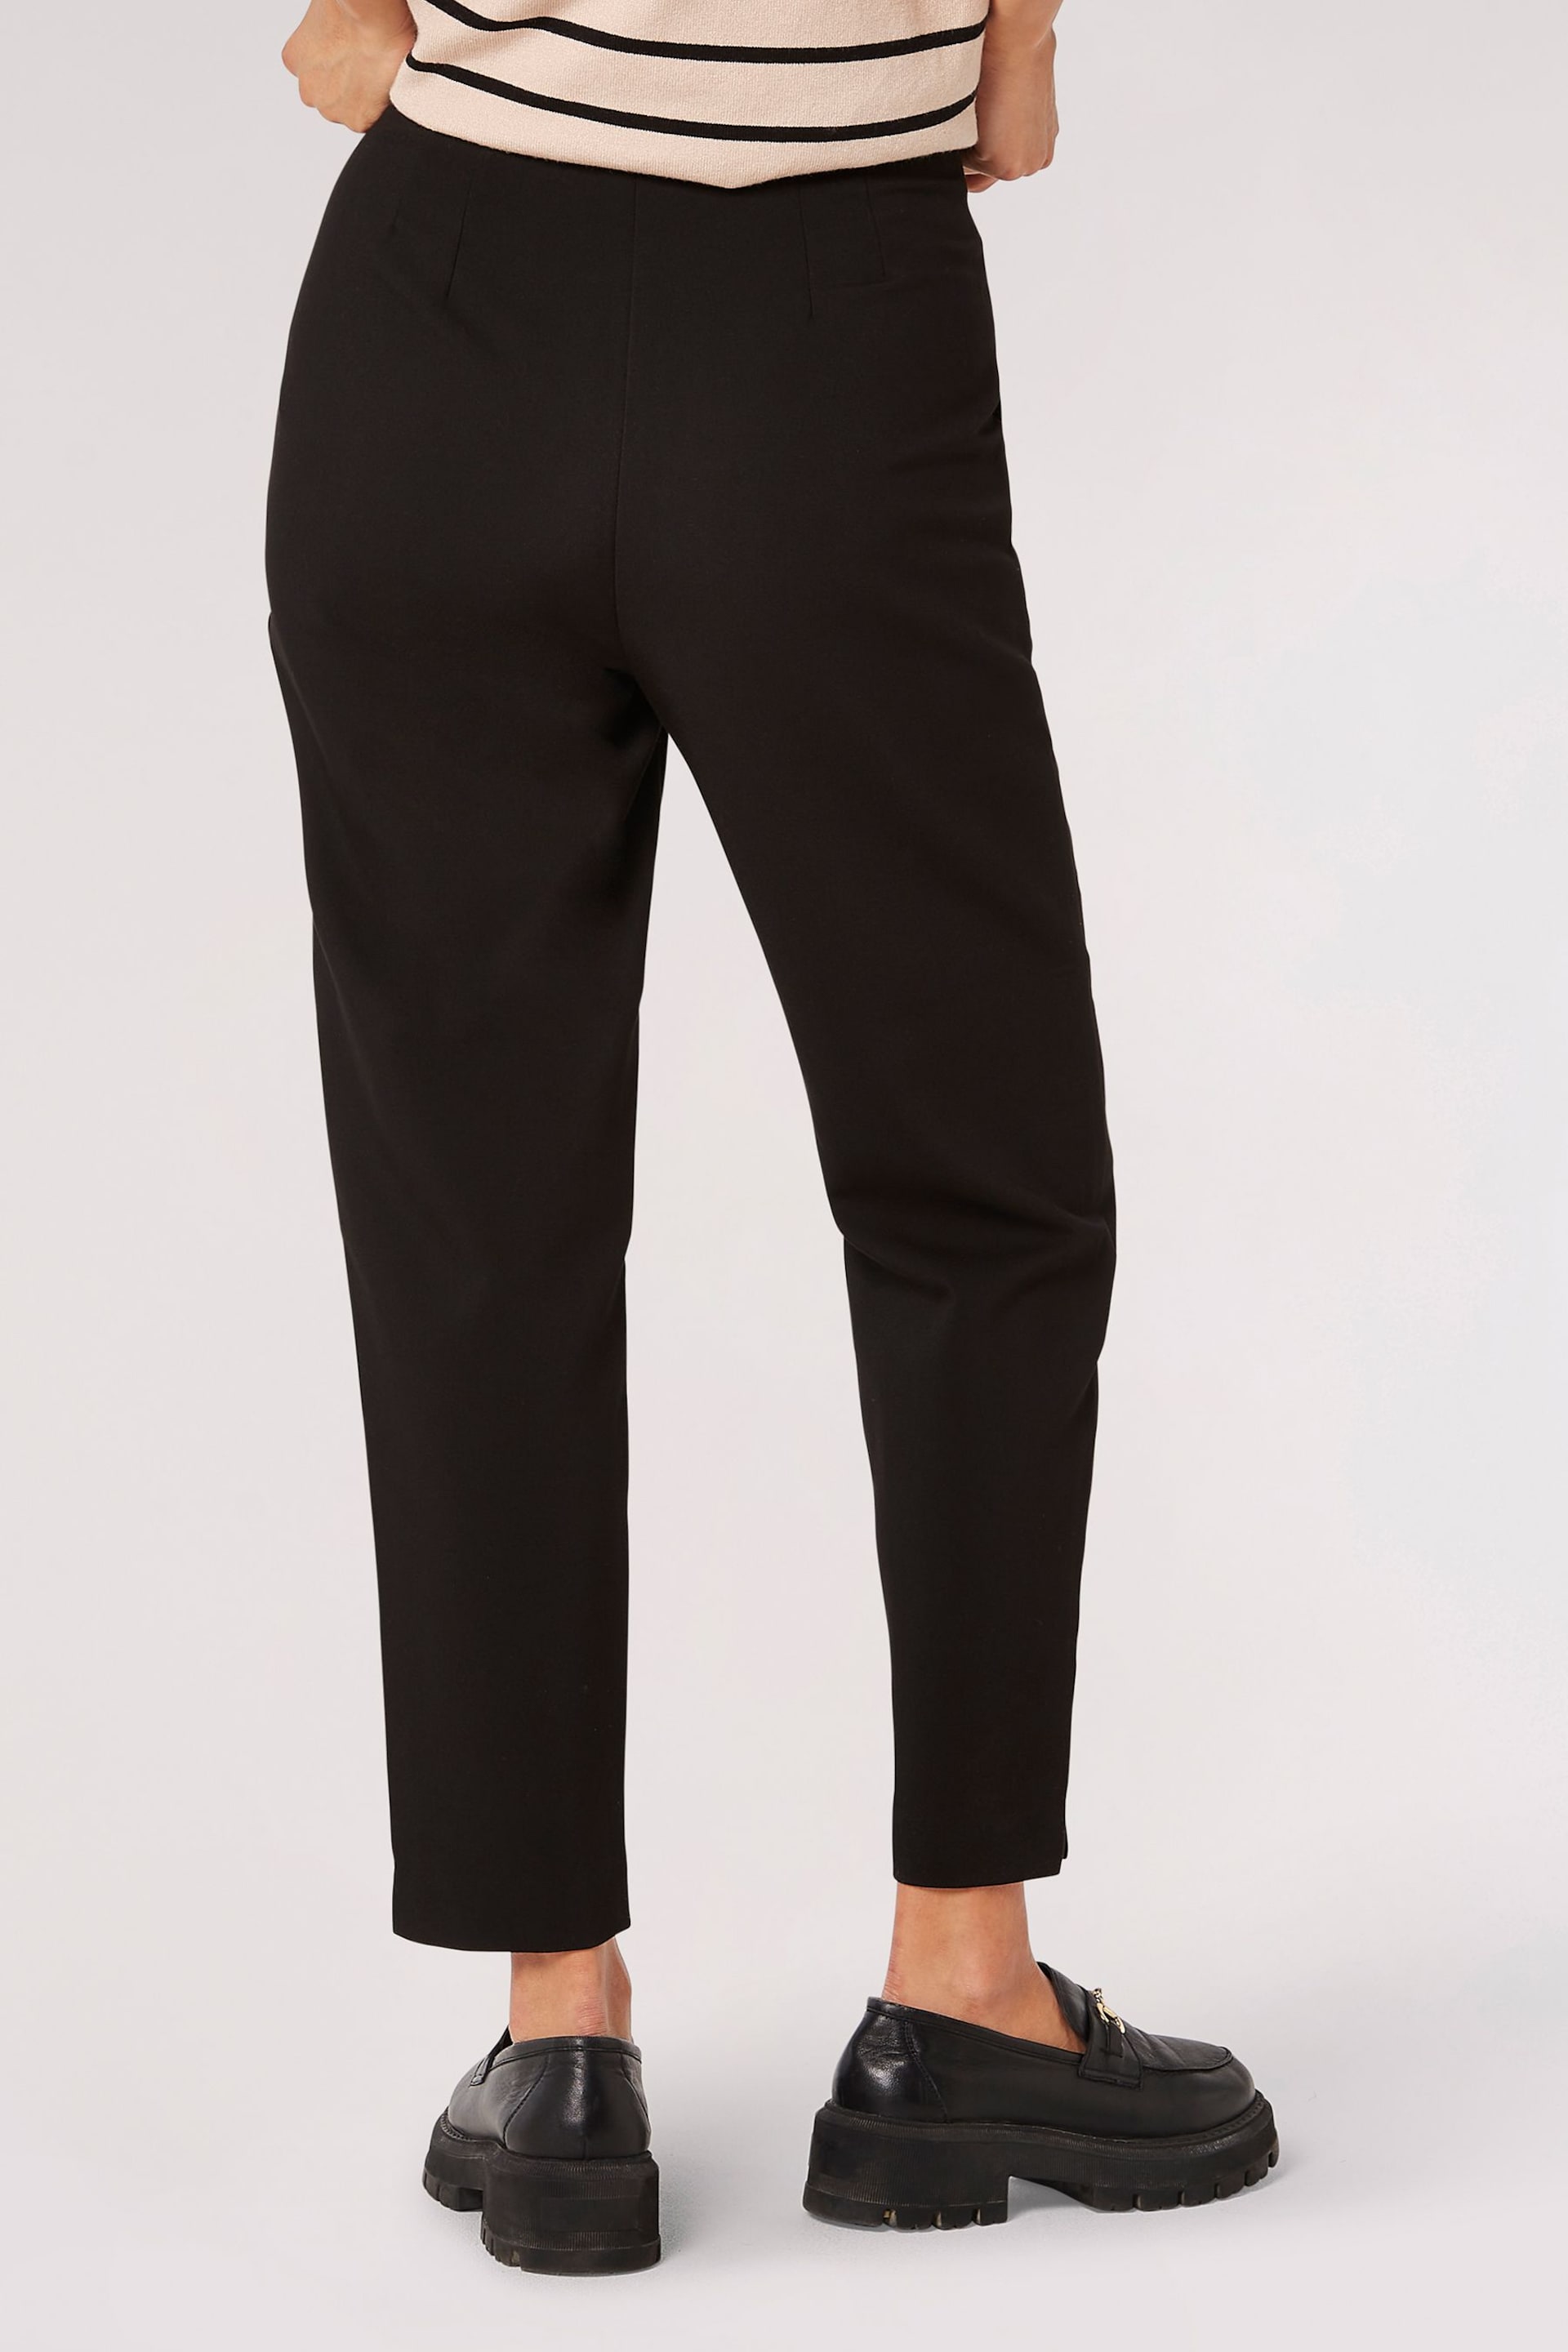 Apricot Black Pintuck Cigarette Trousers - Image 2 of 4